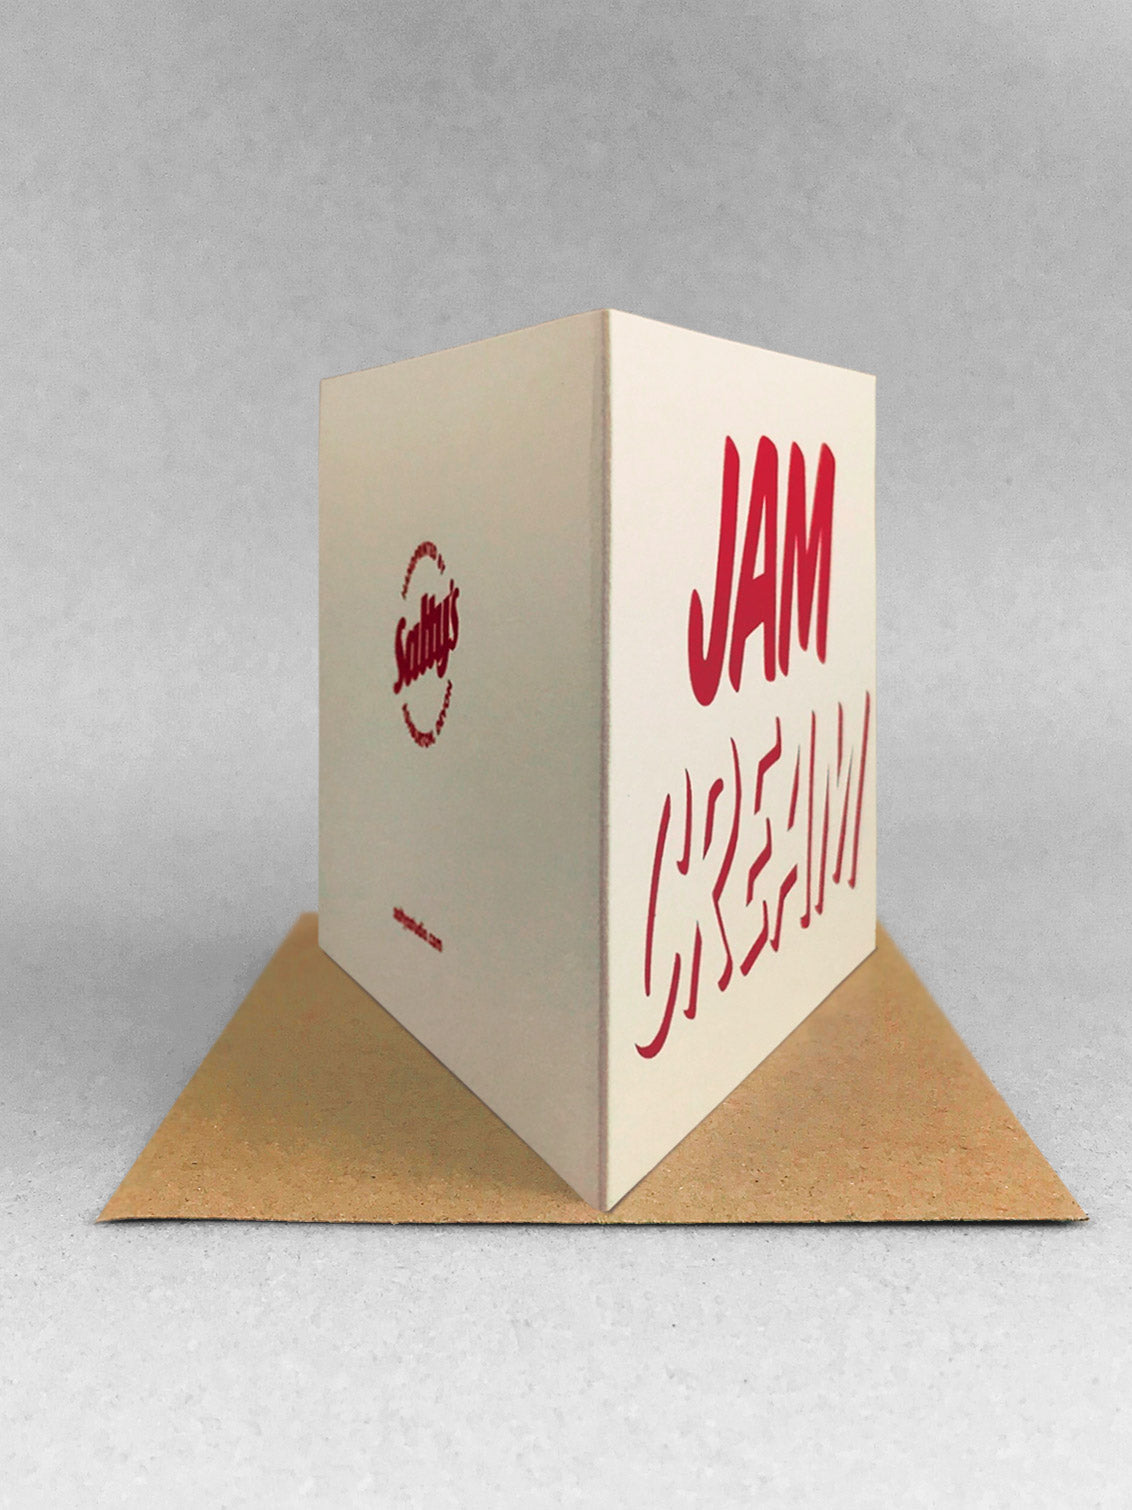 Rear view of cleanly printed type in strawberry red ink on a cream coloured recycled card stock, reading CREAM across the bottom with JAM written on top! Card stood on a kraft envelope in a light grey studio.